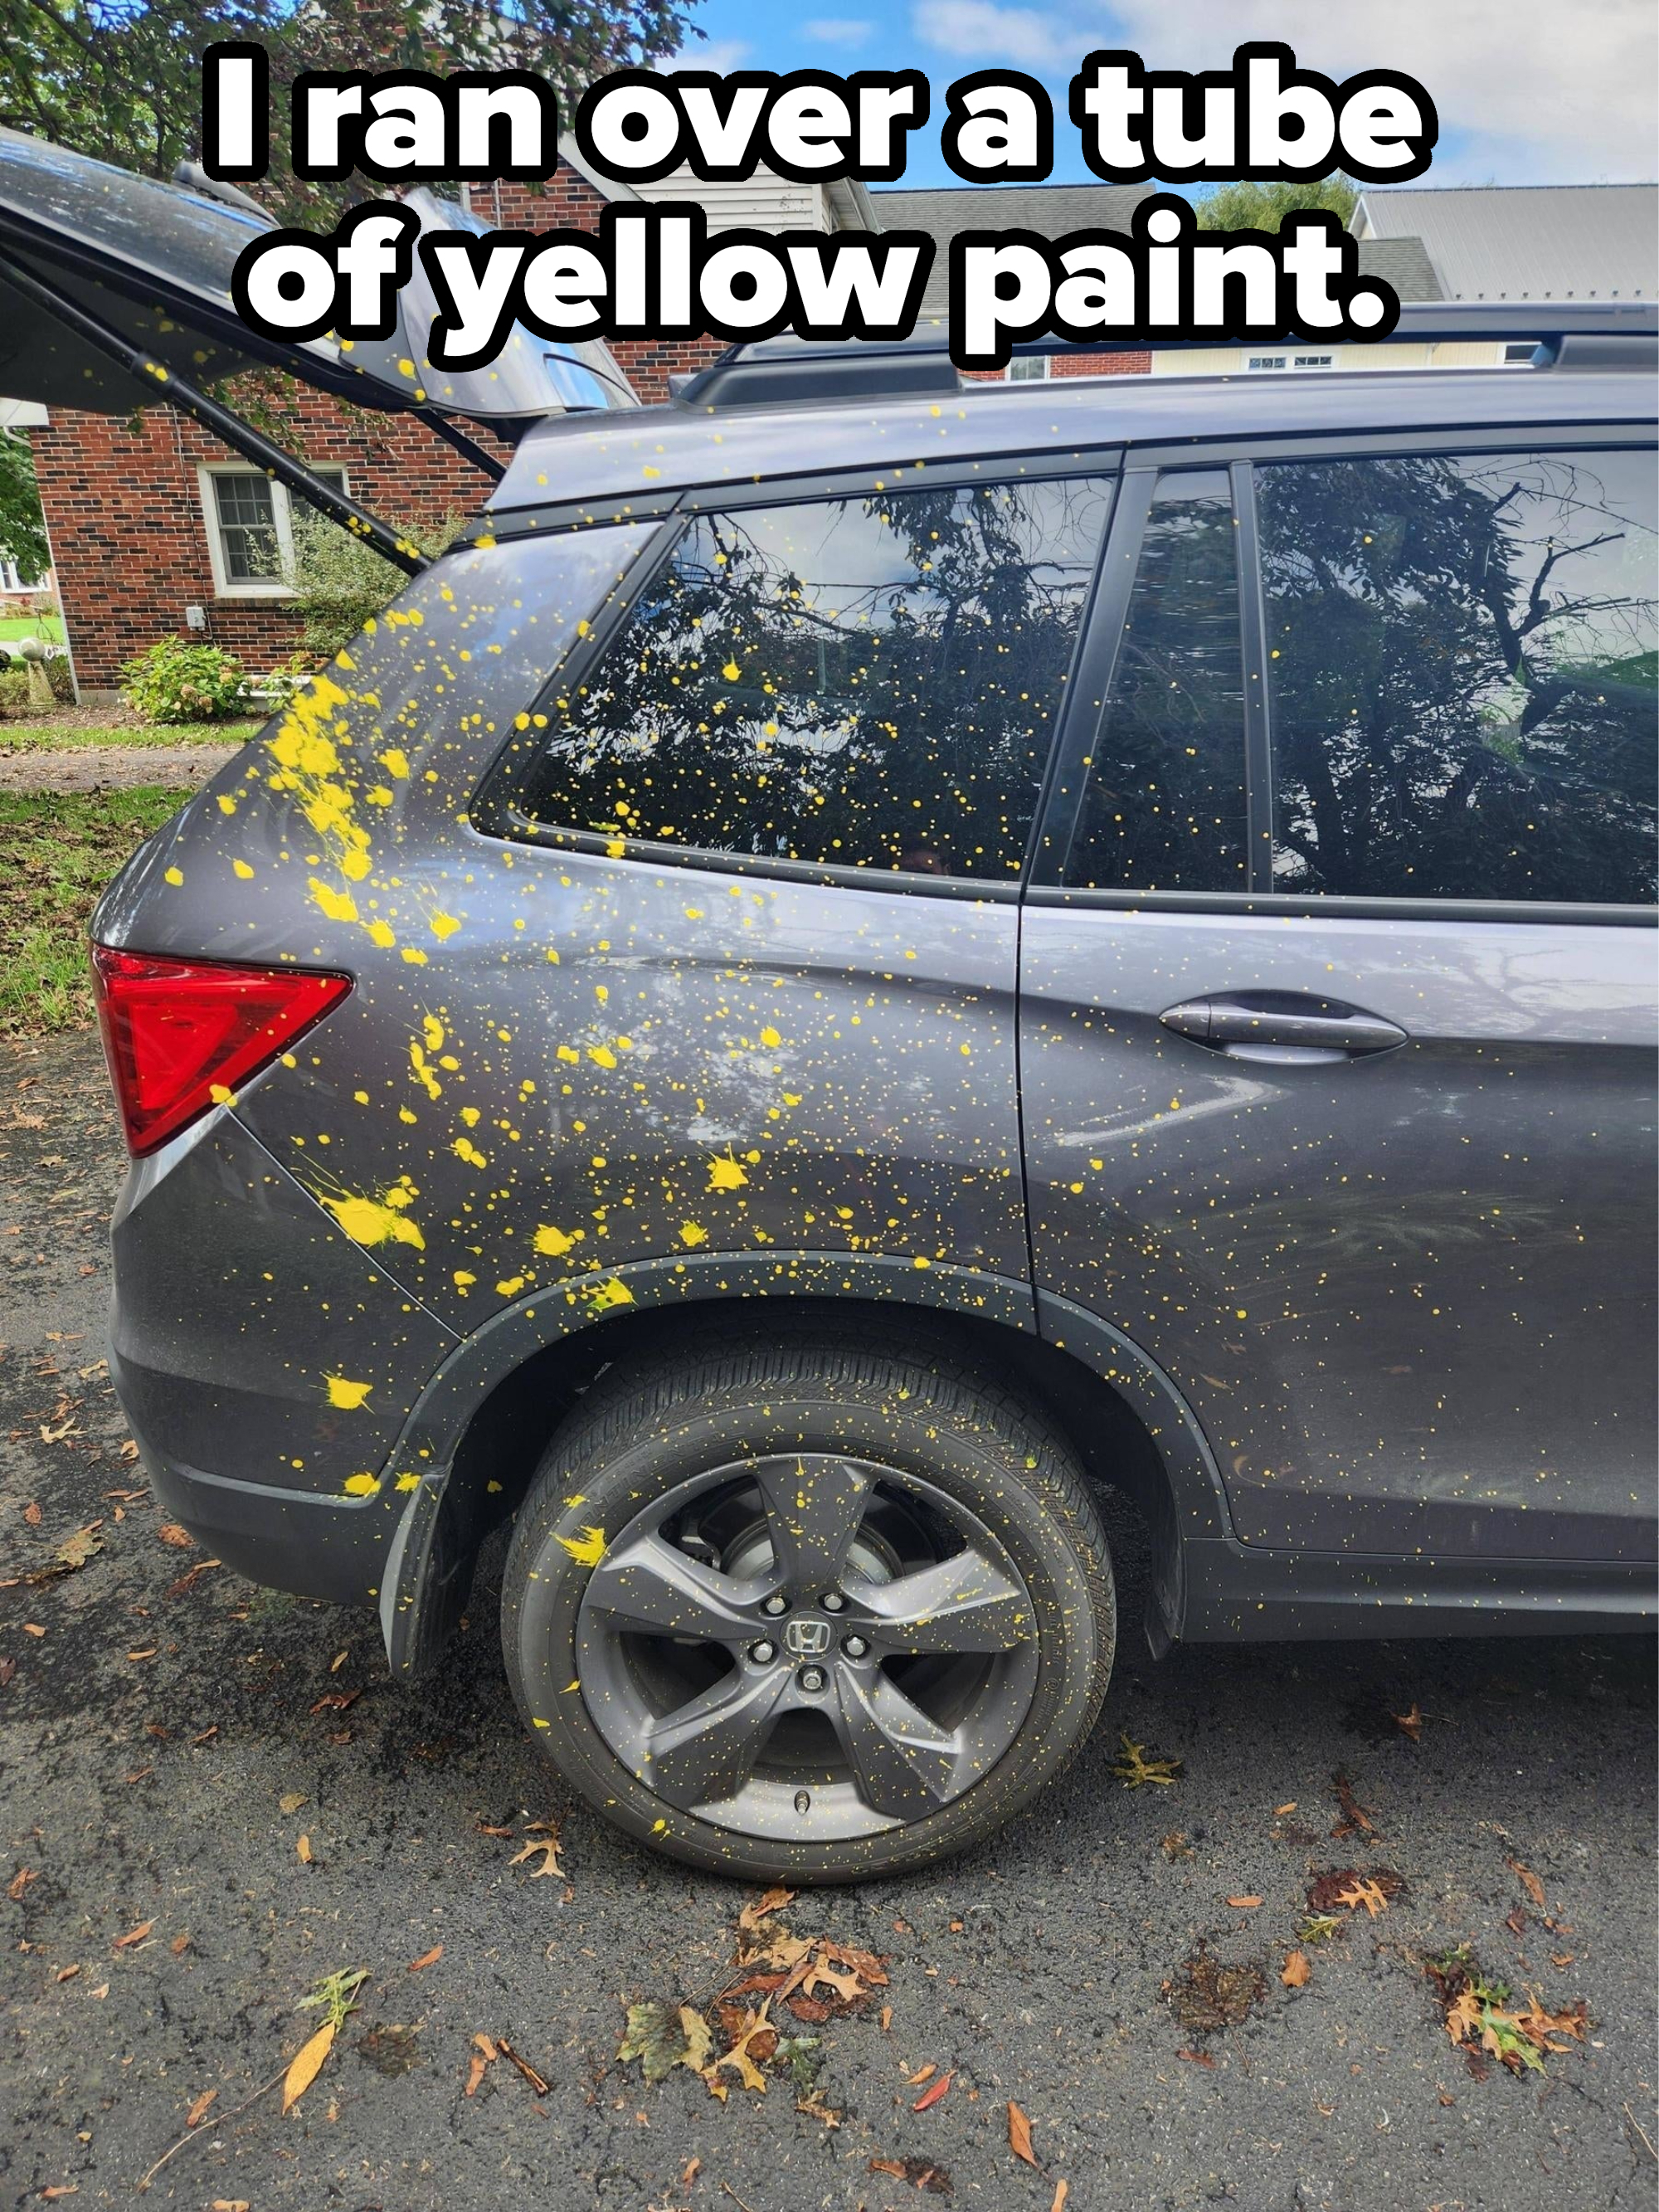 Person ran over a tube of yellow paint, and it got all over the back of their car